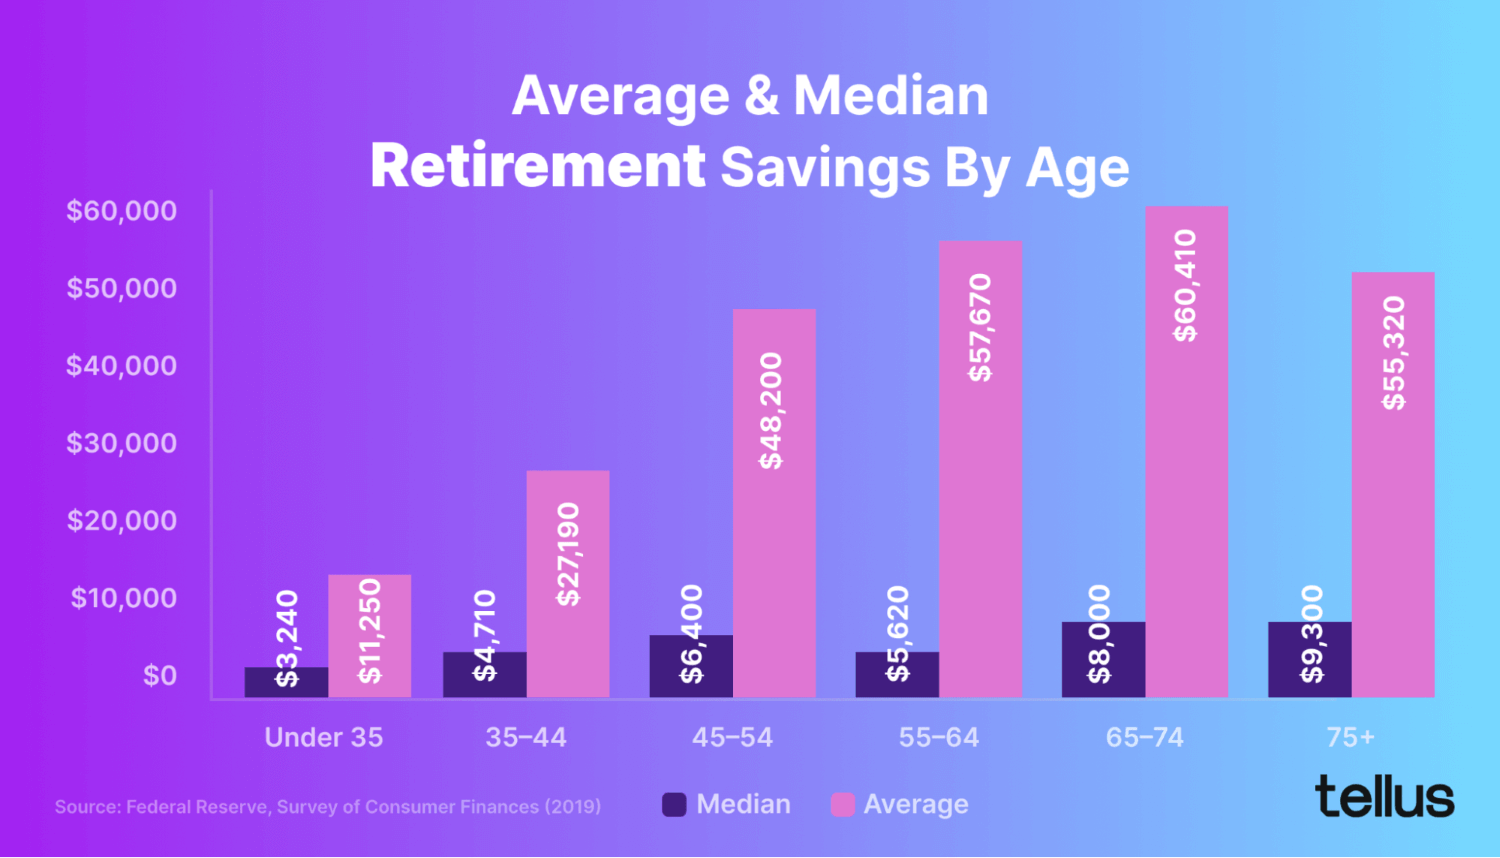 How much Americans have saved based on age?